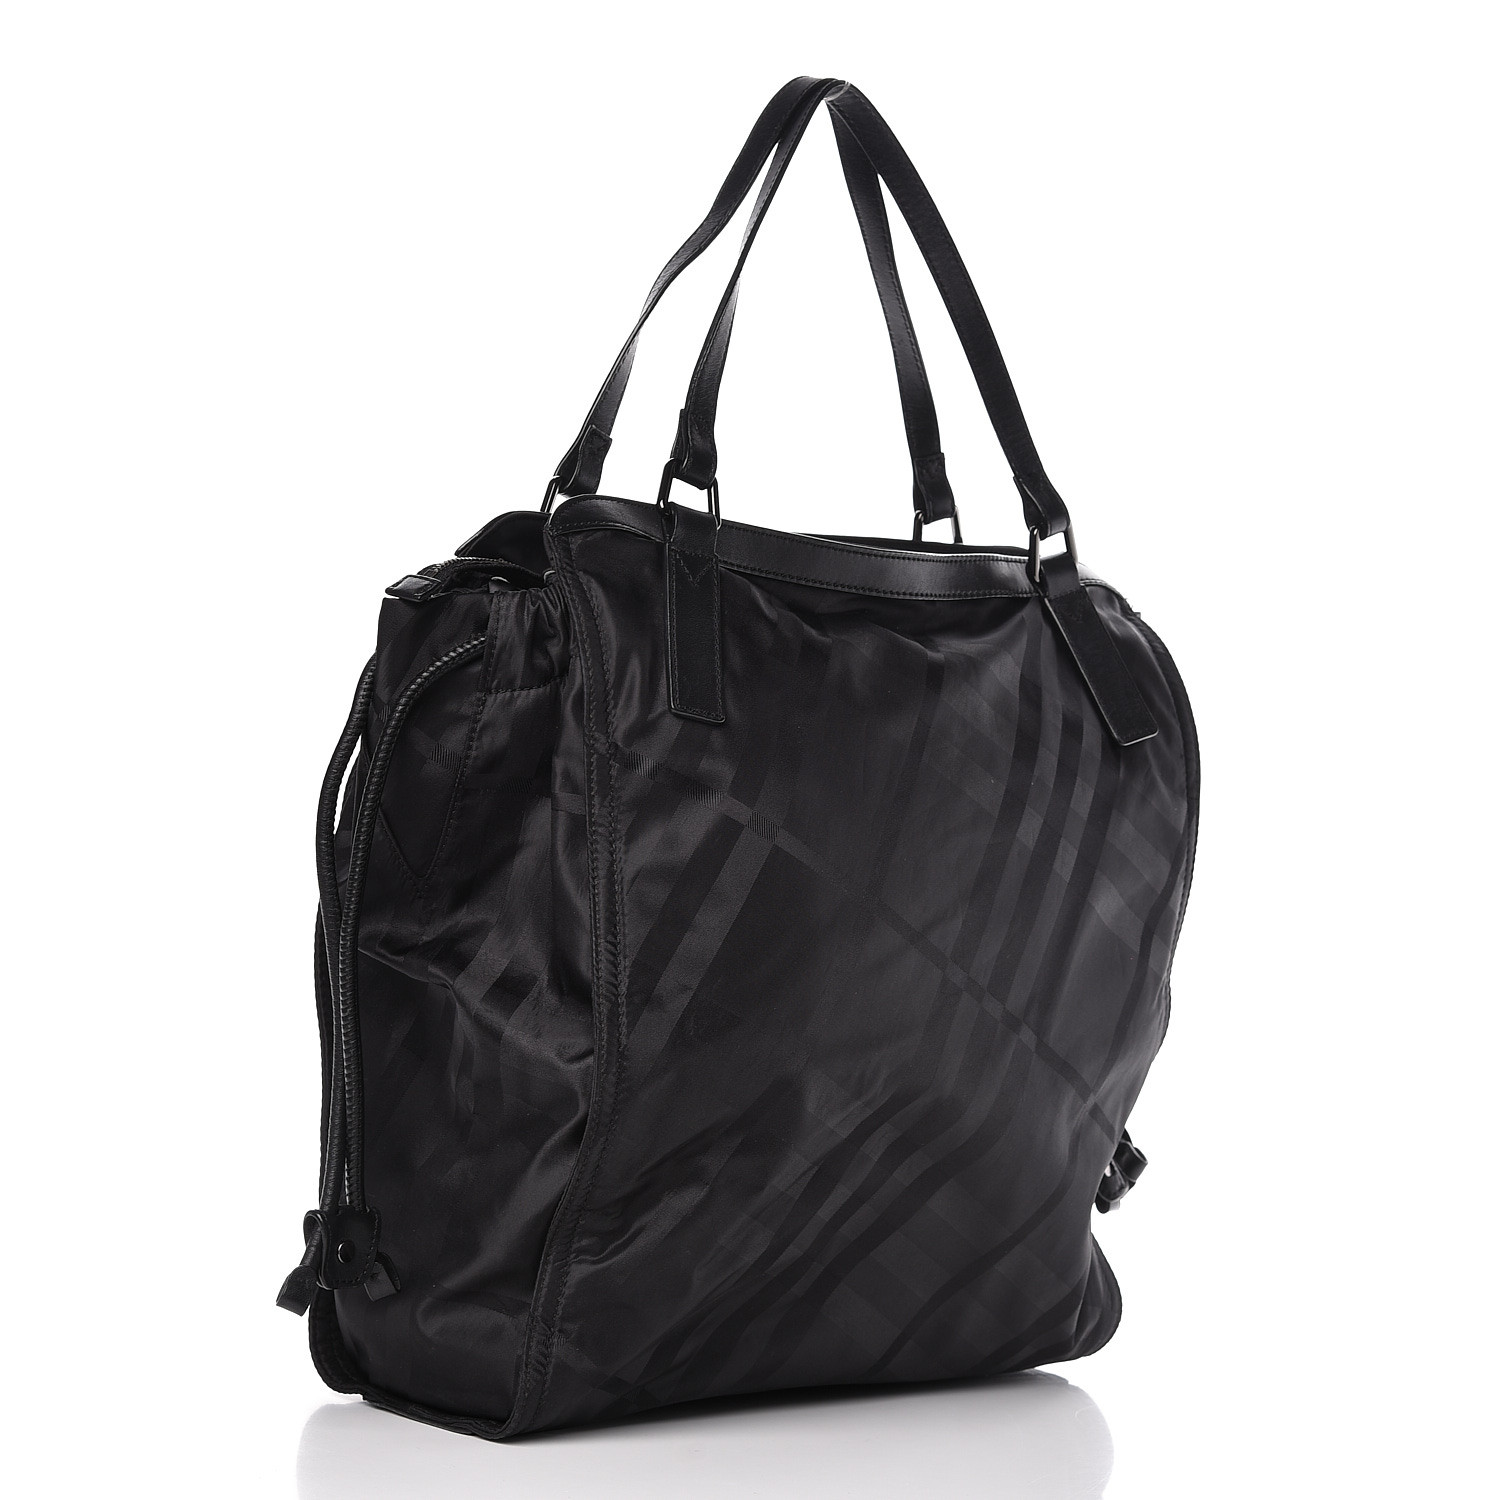 BURBERRY Nylon Check Buckleigh Packable Tote Black 483162